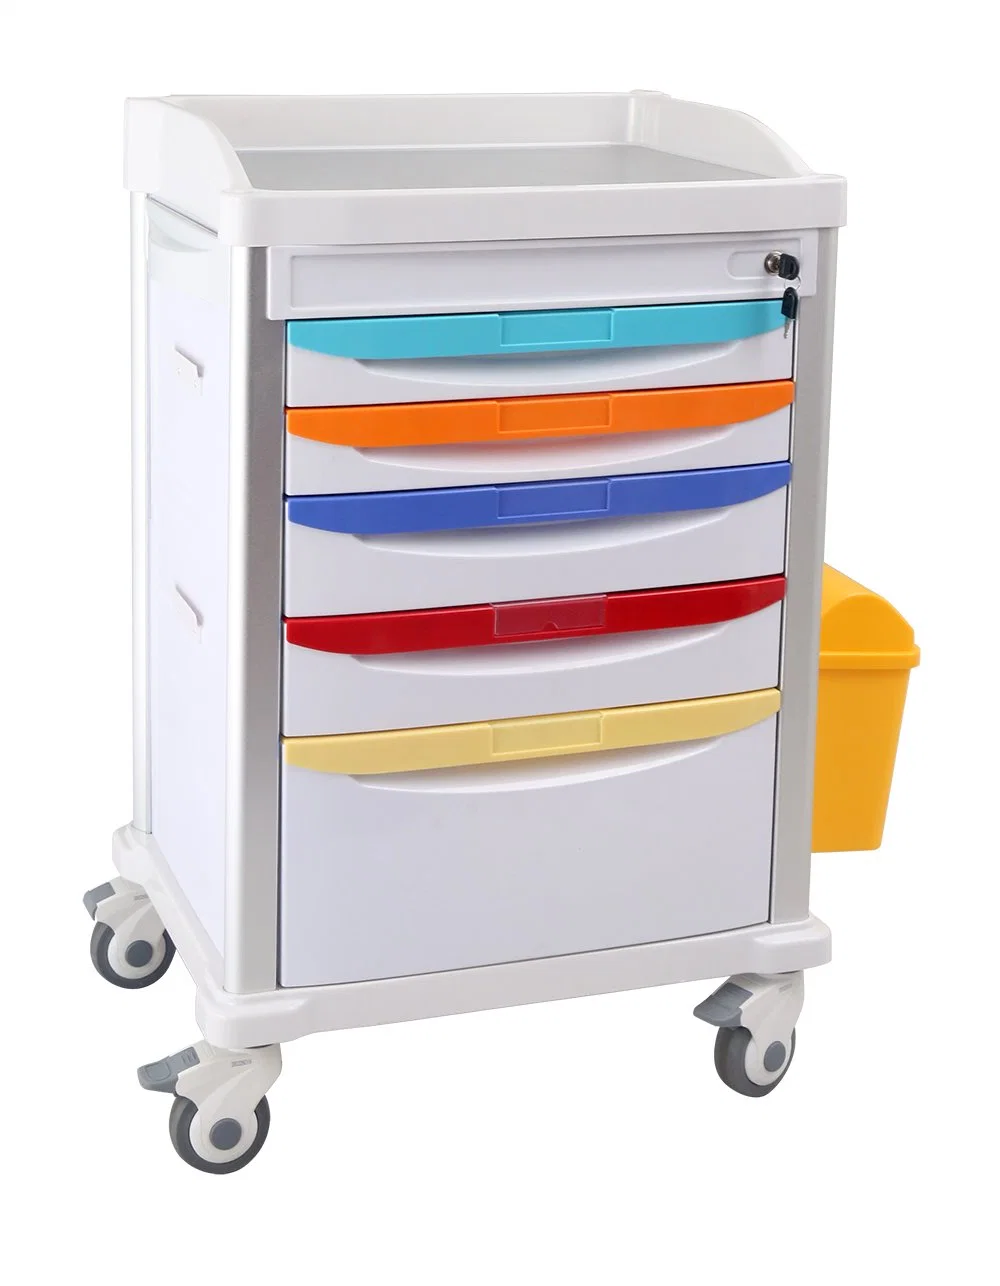 [Mt650p] ABS Medicine Distribution Trolley and Cart with Drawers for Medical,Emergency,Logistic,Laundry, Treatment,Anesthesia Hospital Furniture & Equipment- F